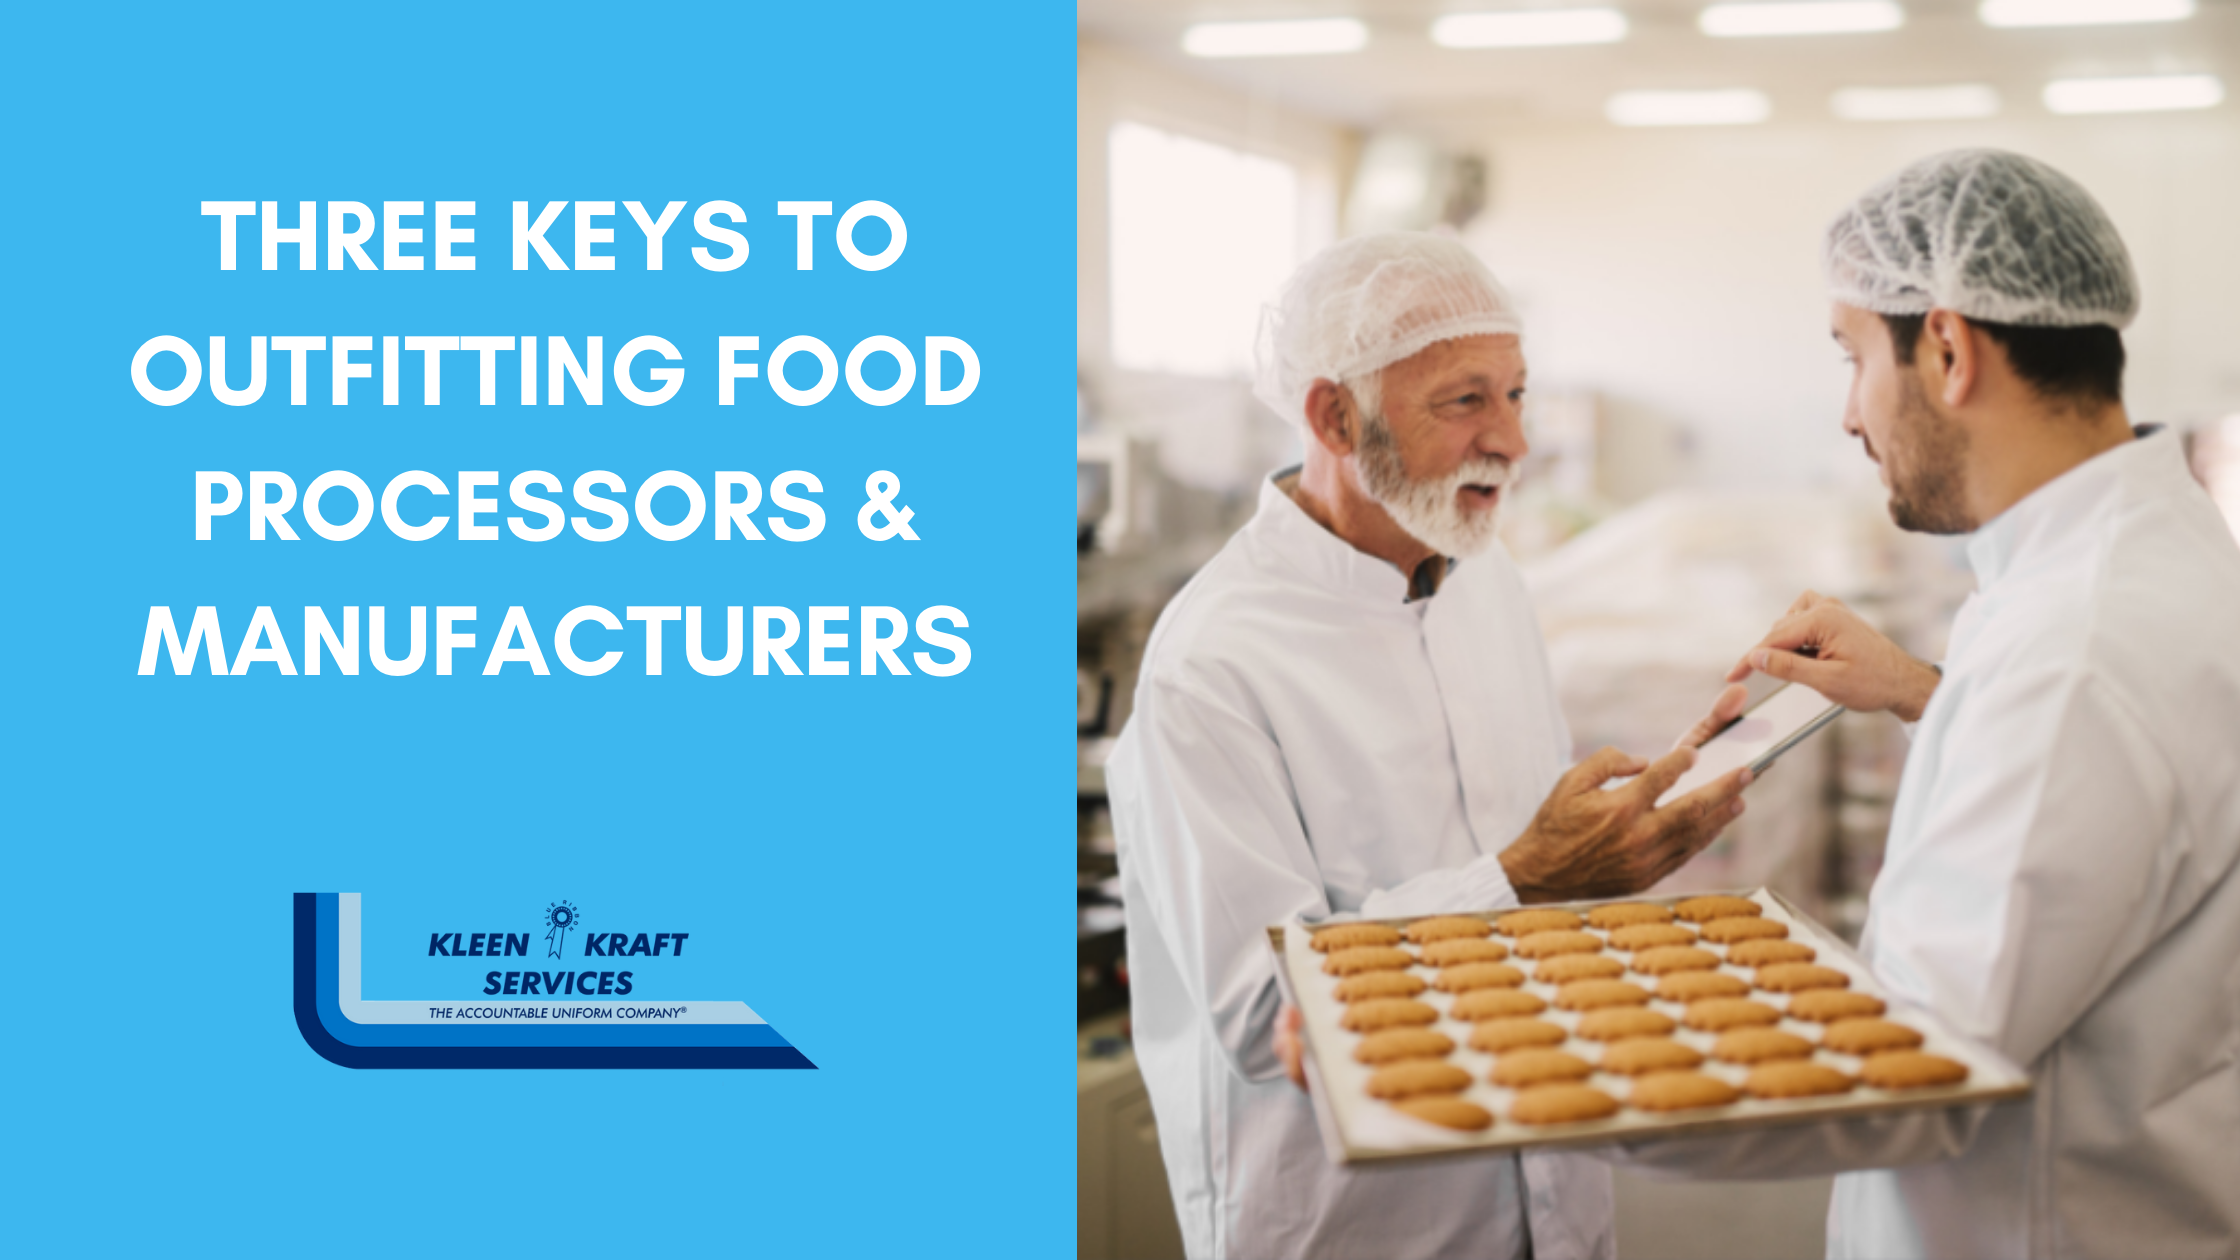 Three Keys to Outfitting Food Processors & Manufacturers